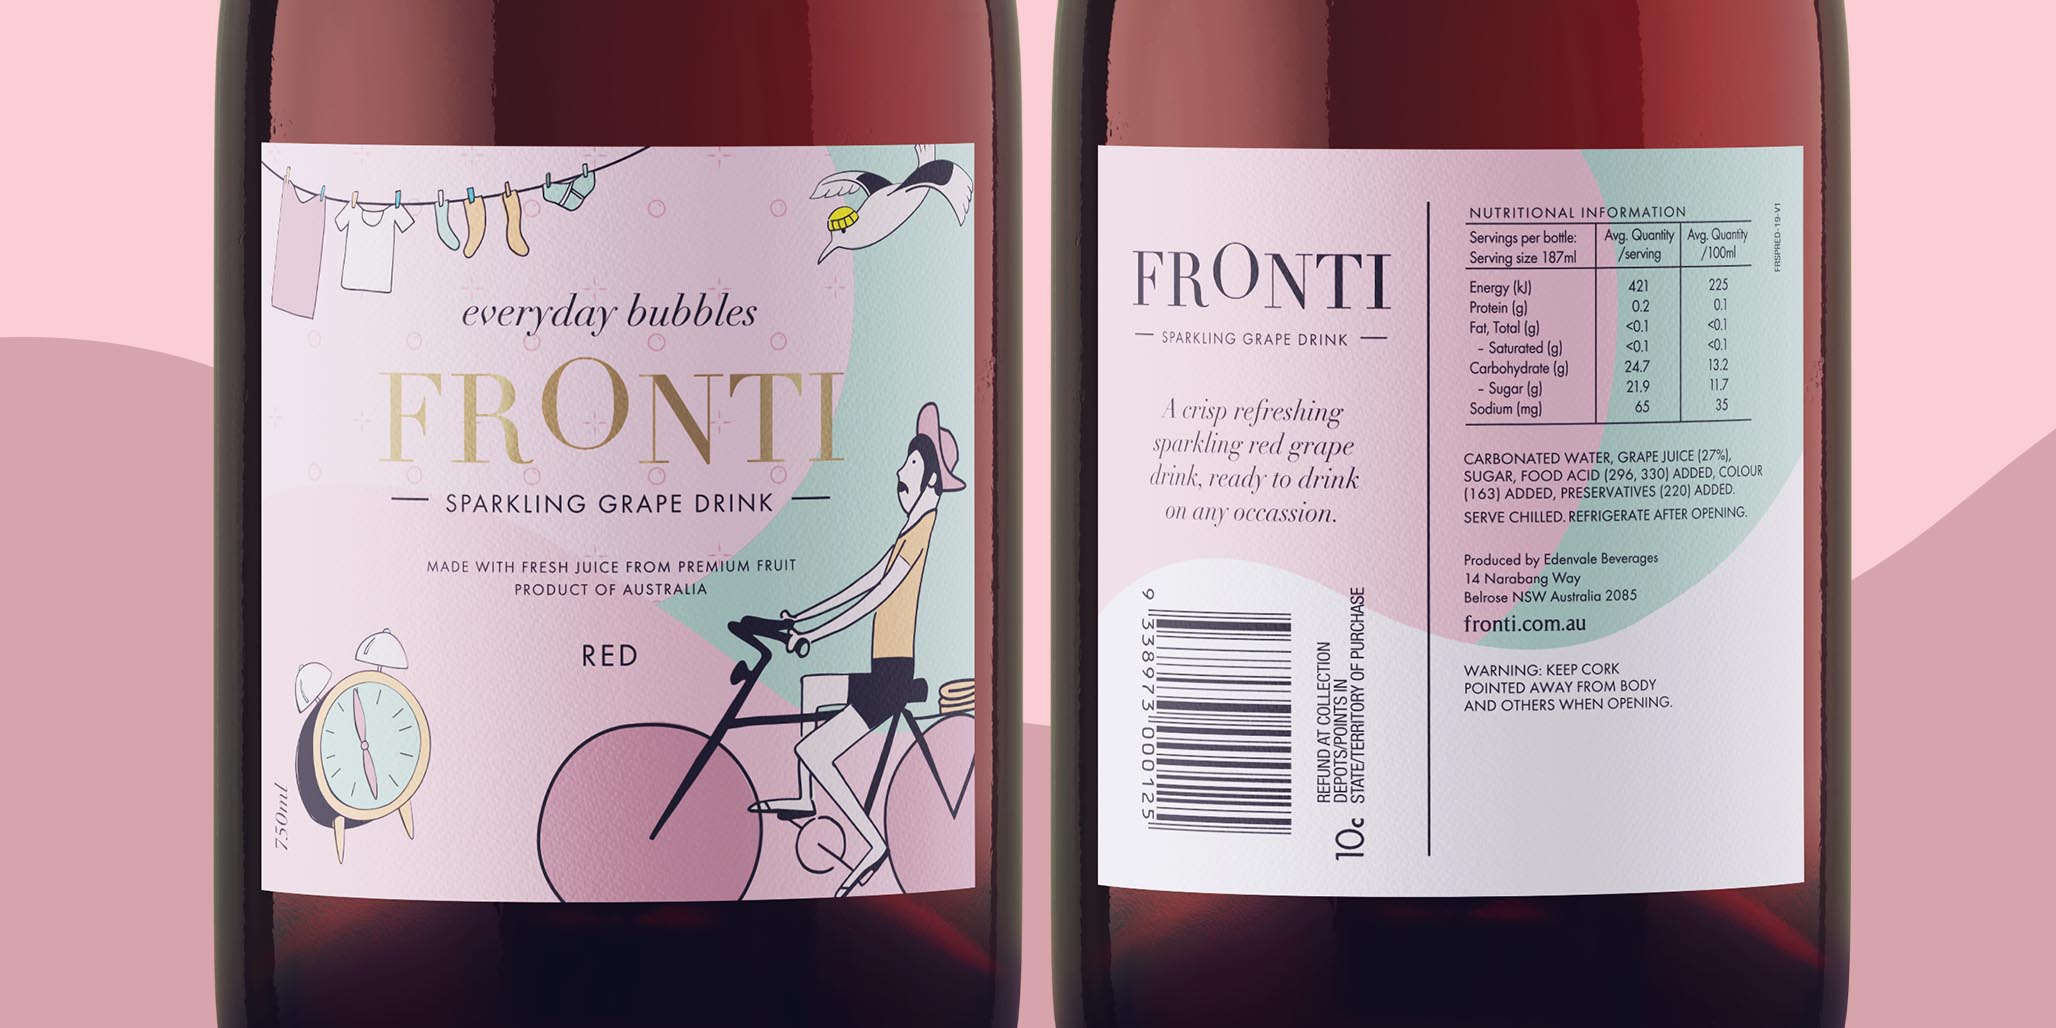 Wine Packaging Design project by Branding Agency, Percept, image D